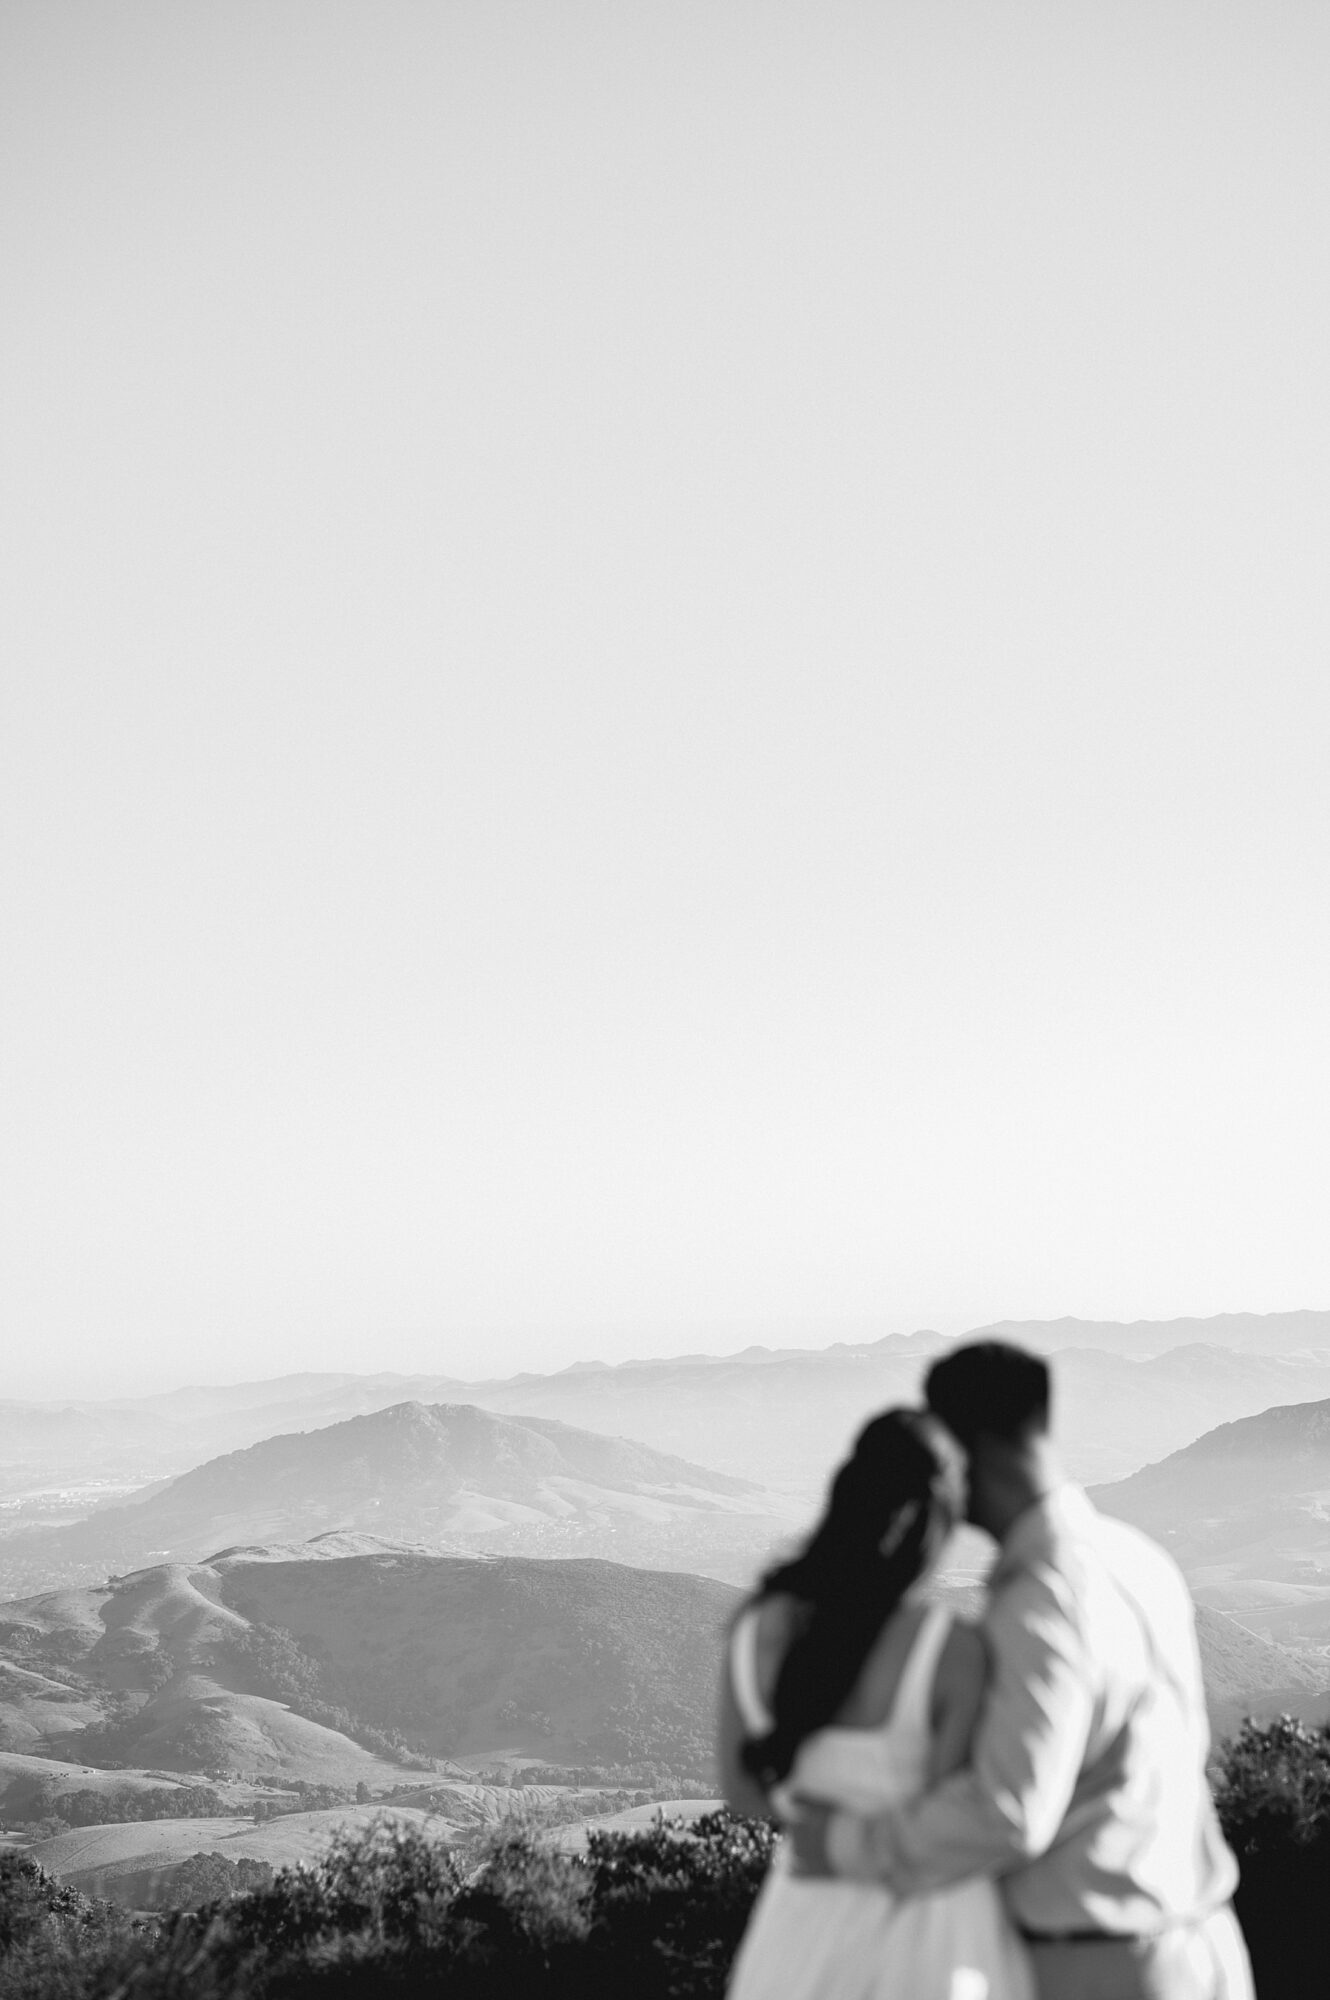 Nikkels Photography, a Central California Coast photographer, shares an engagement at Cuesta Ridge she was able to capture